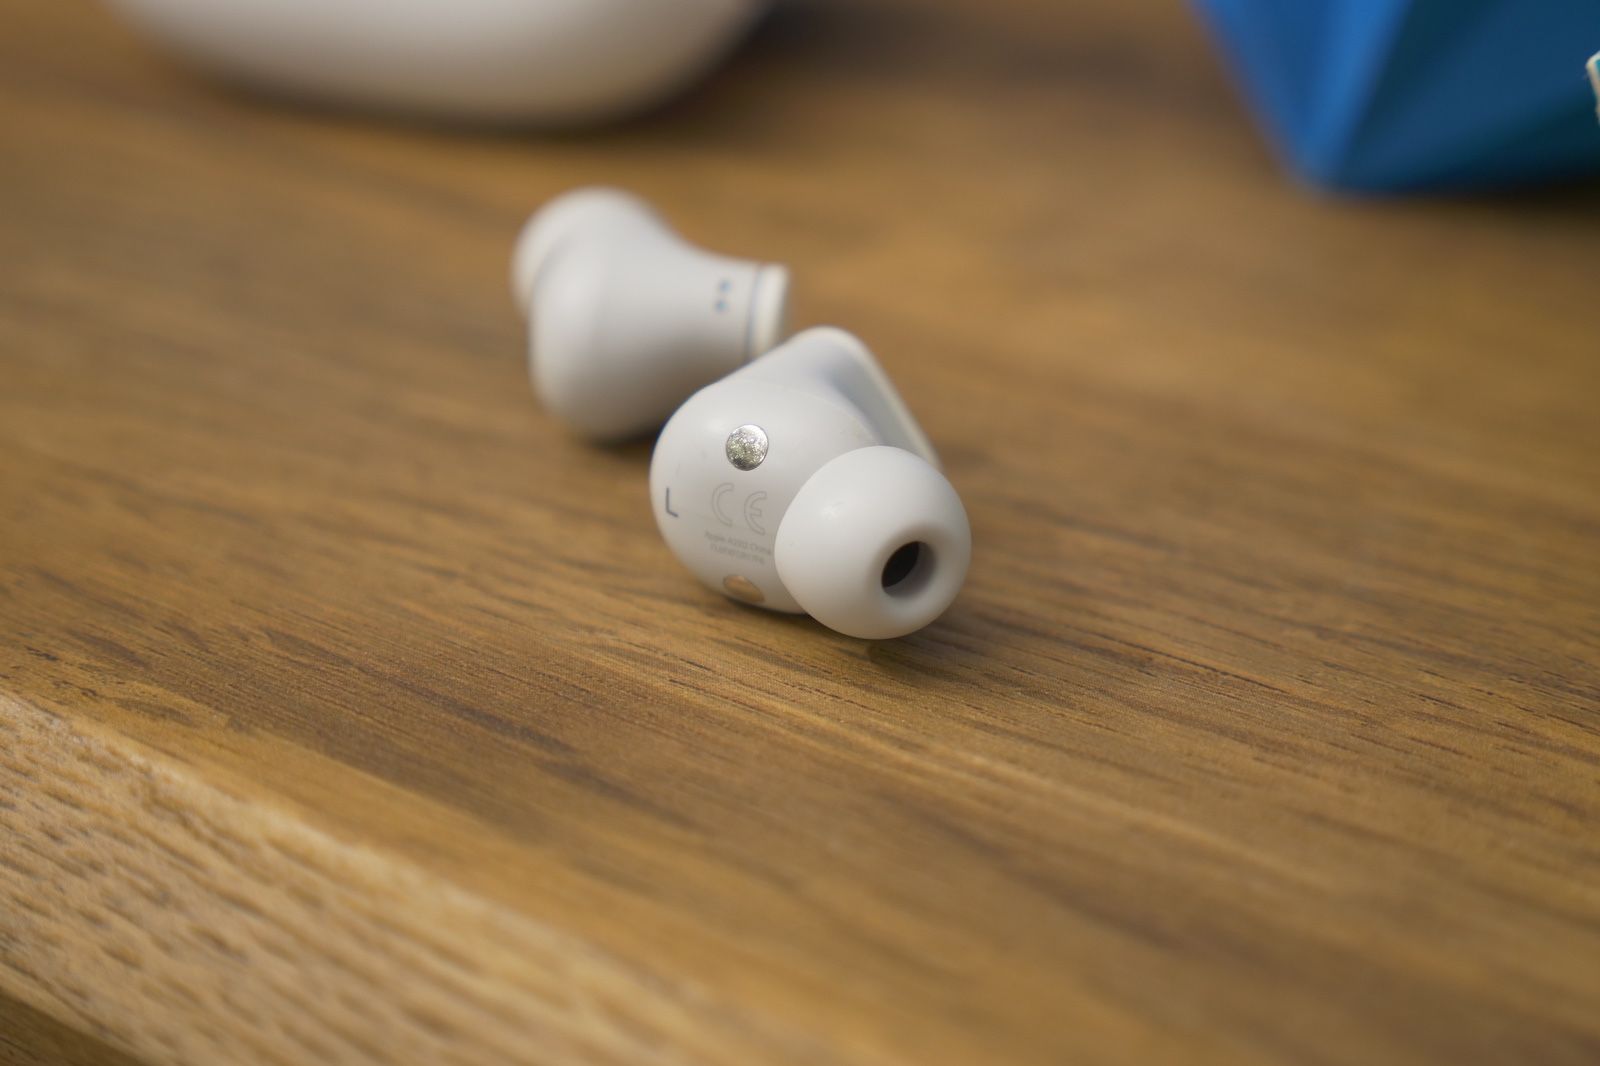 Beats Studio Buds review: Adding appeal for Android users